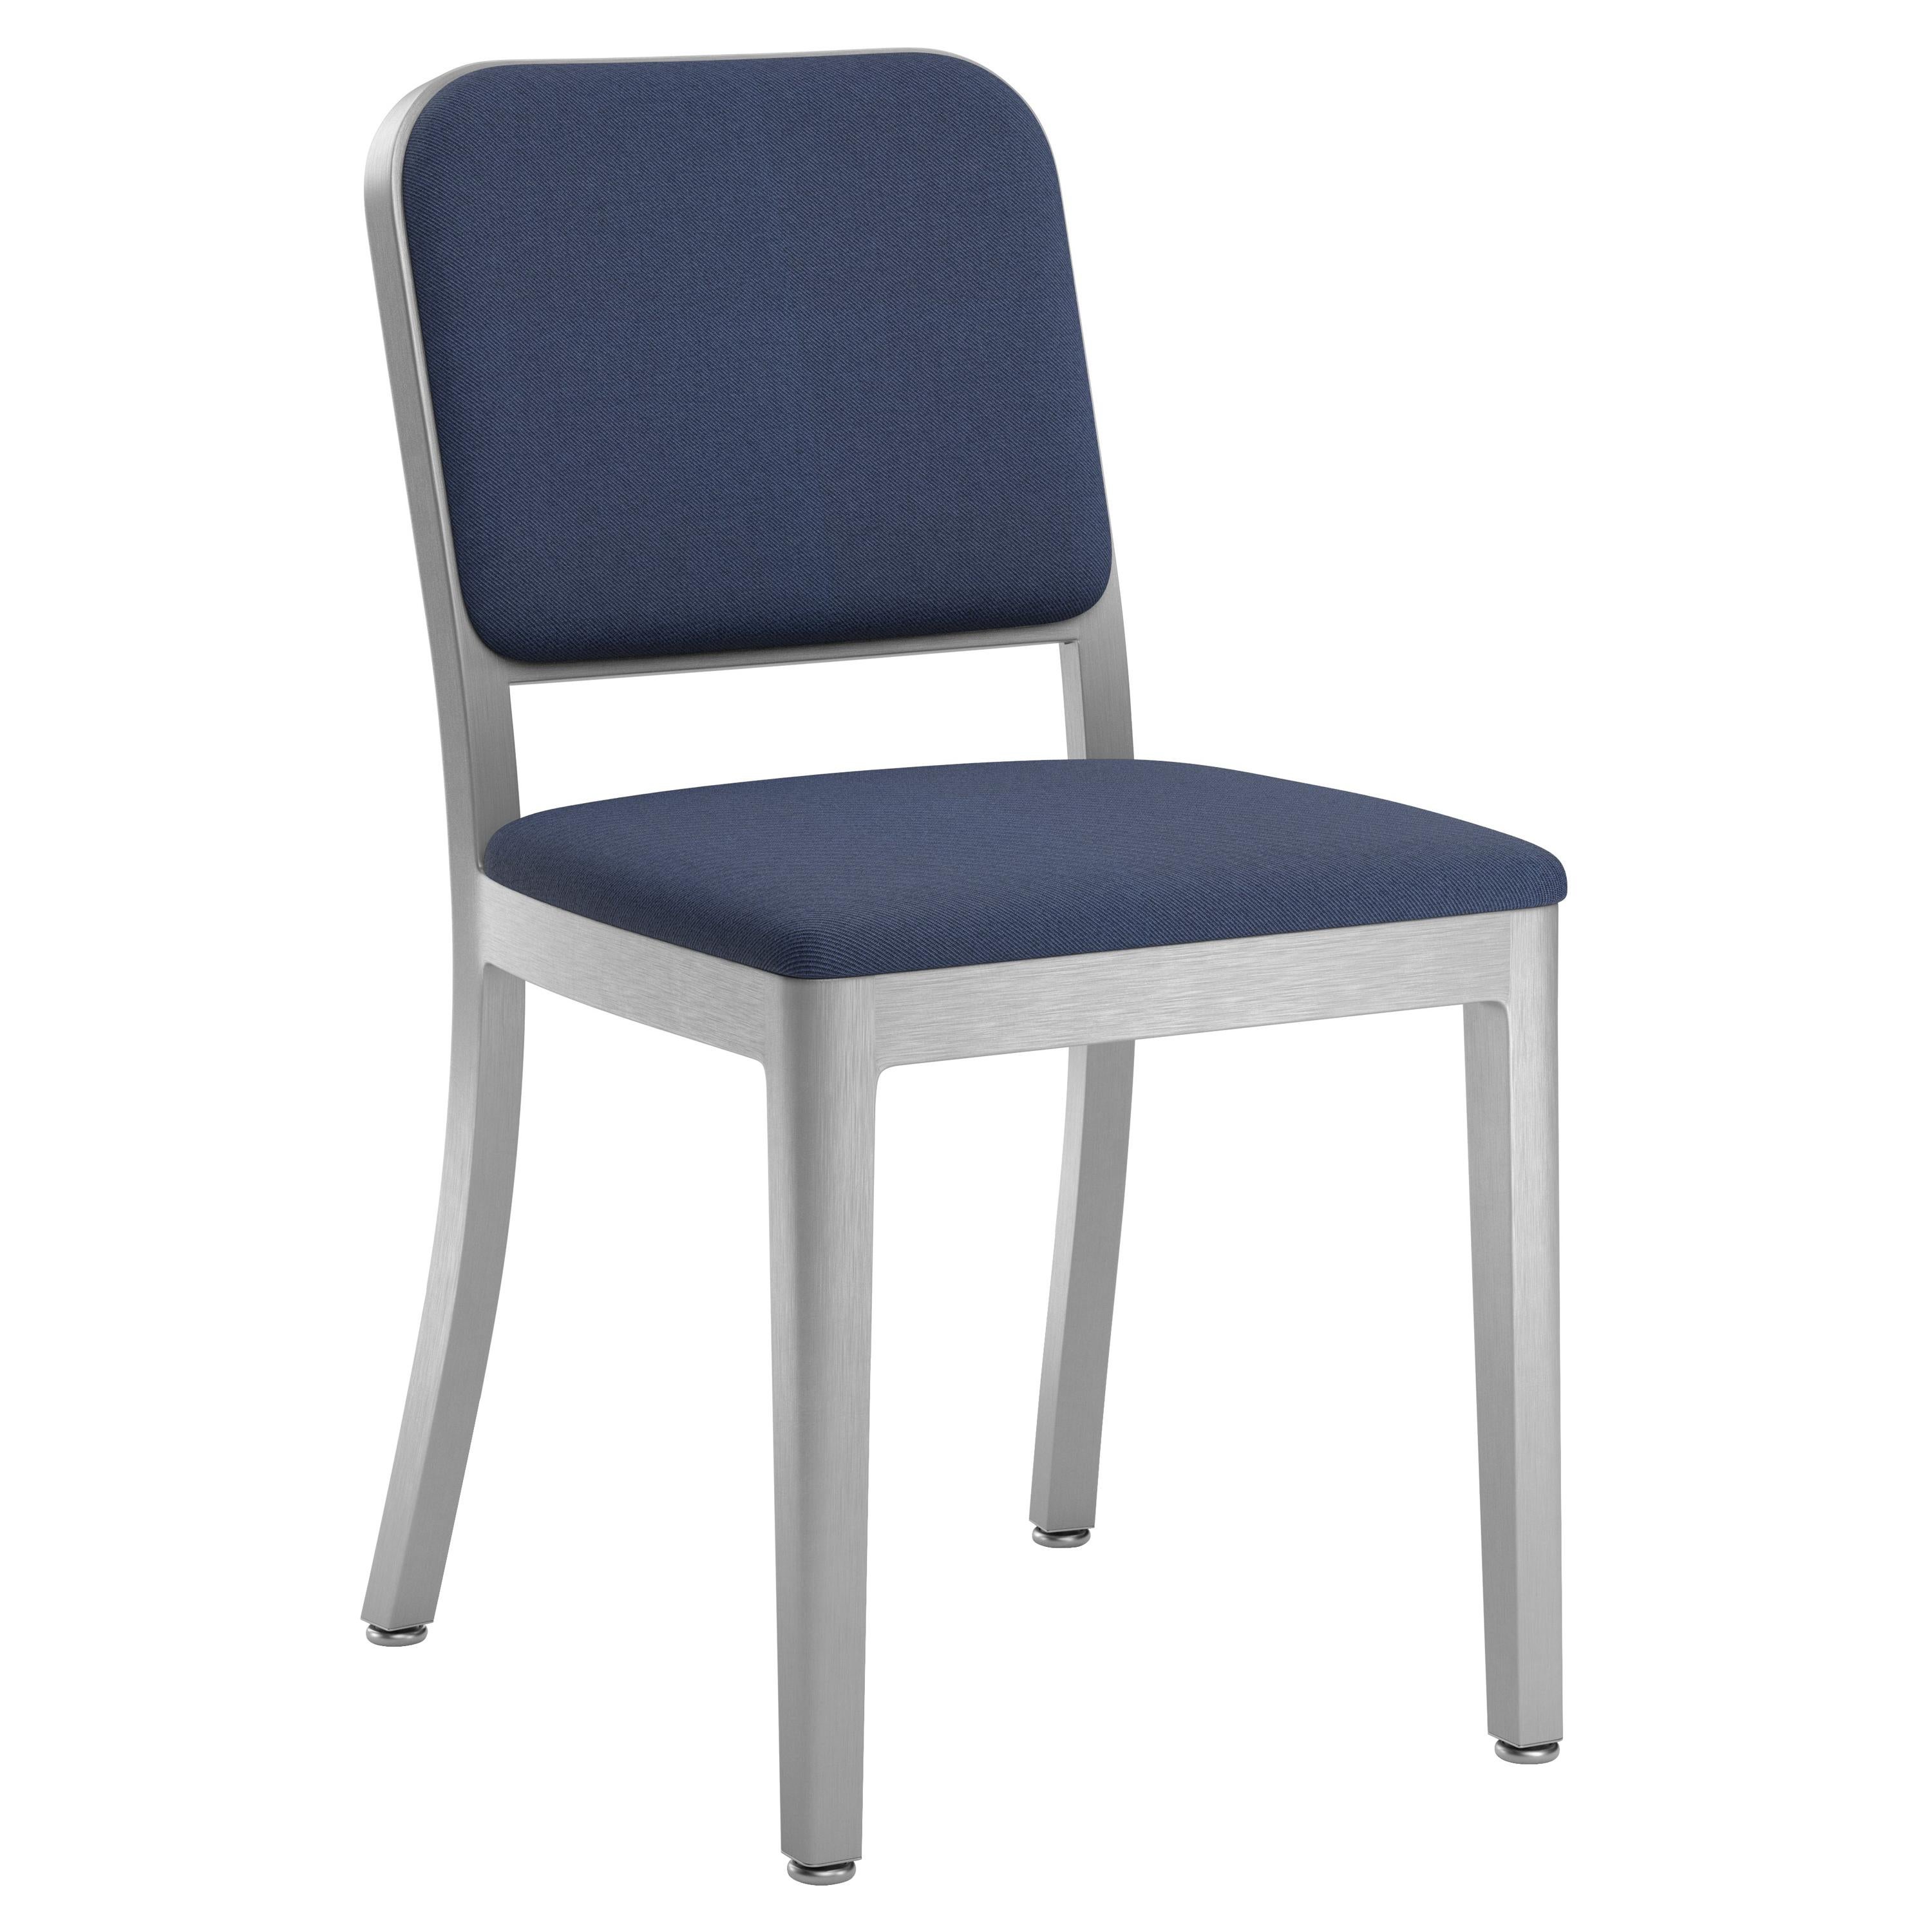 Emeco Navy Officer Side Chair in Navy Blue Fabric with Aluminum Frame